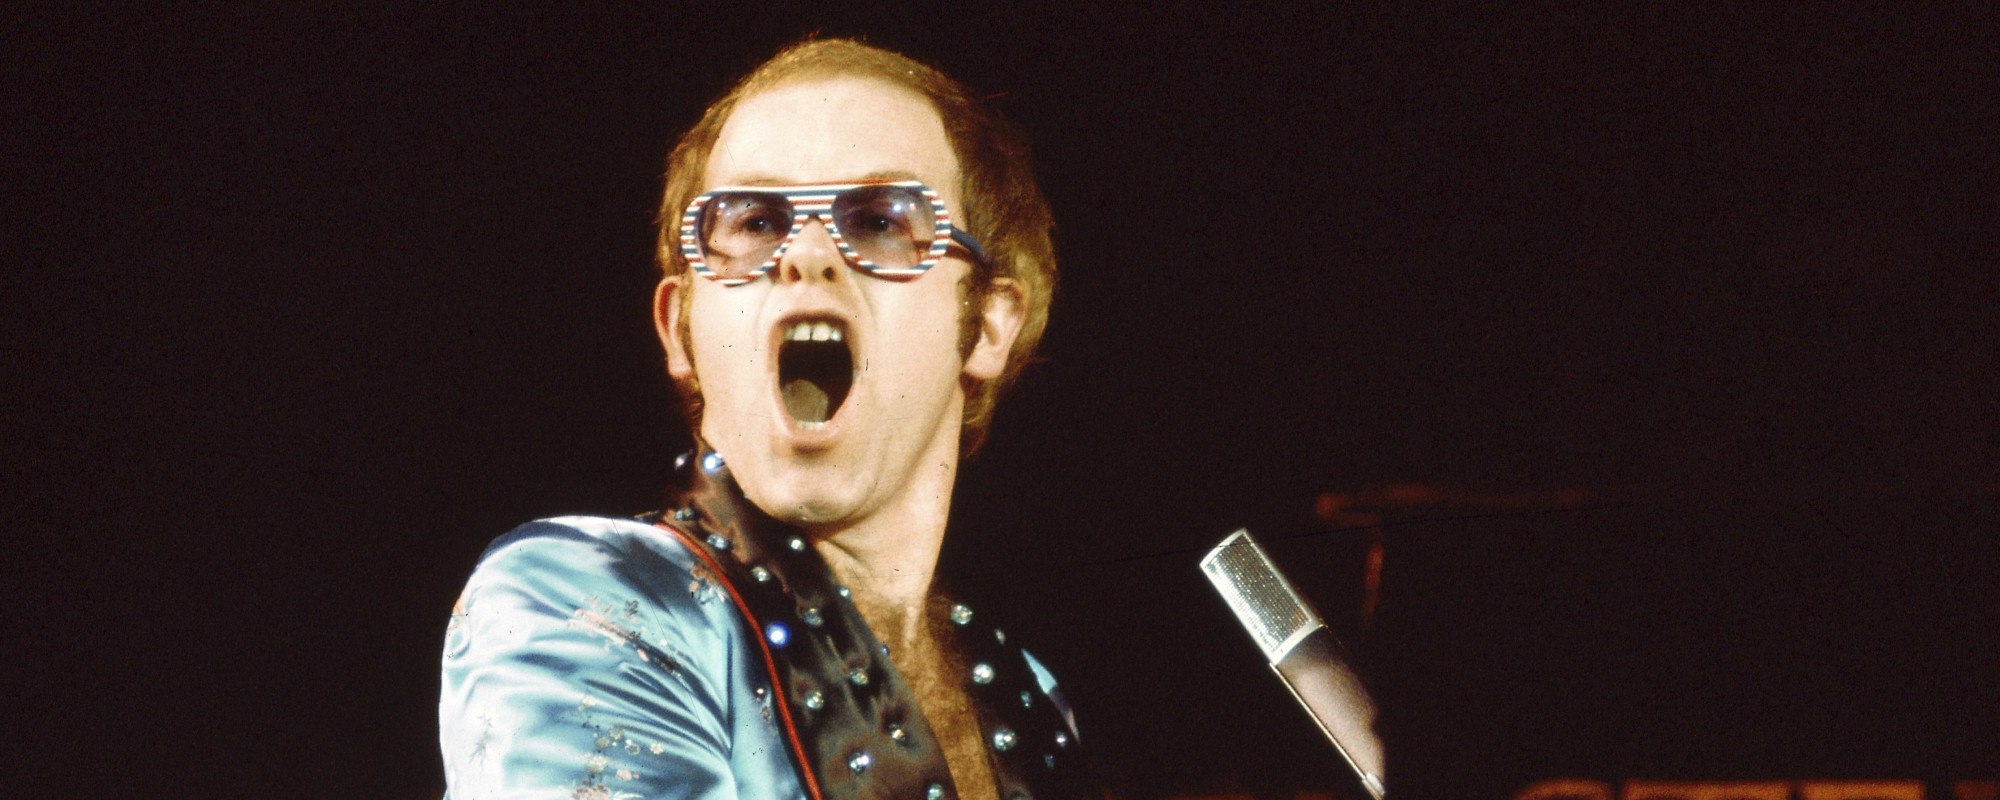 Ranking the Top 5 Songs on Elton John’s 1971 Tour de Force ‘Madman Across the Water’